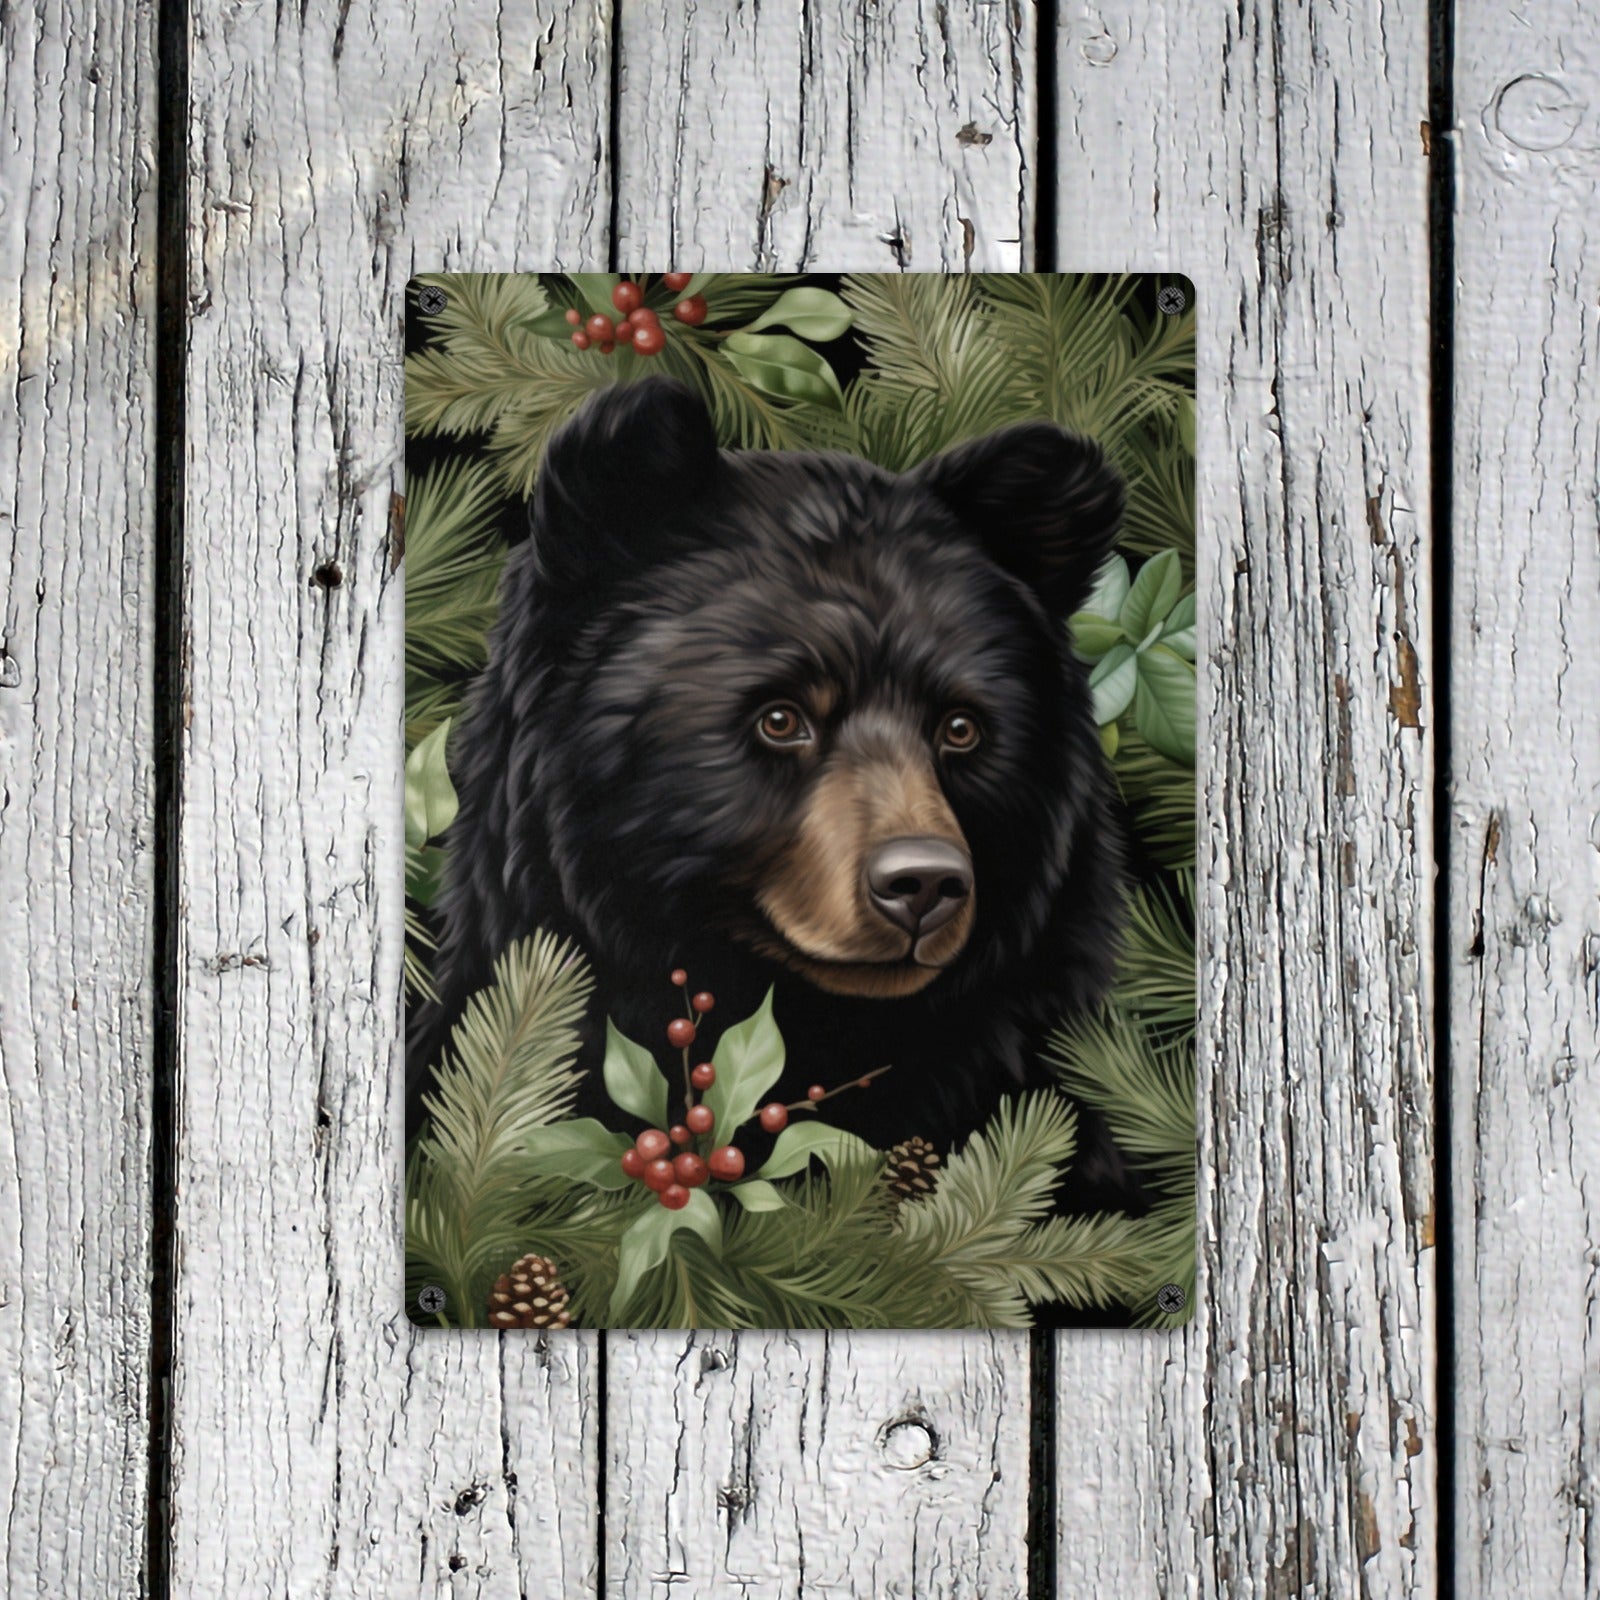 Rustic Lodge Home Decor Holly Black Bear Sign Indoor / Outdoor Metal Tin Sign 12"x16"